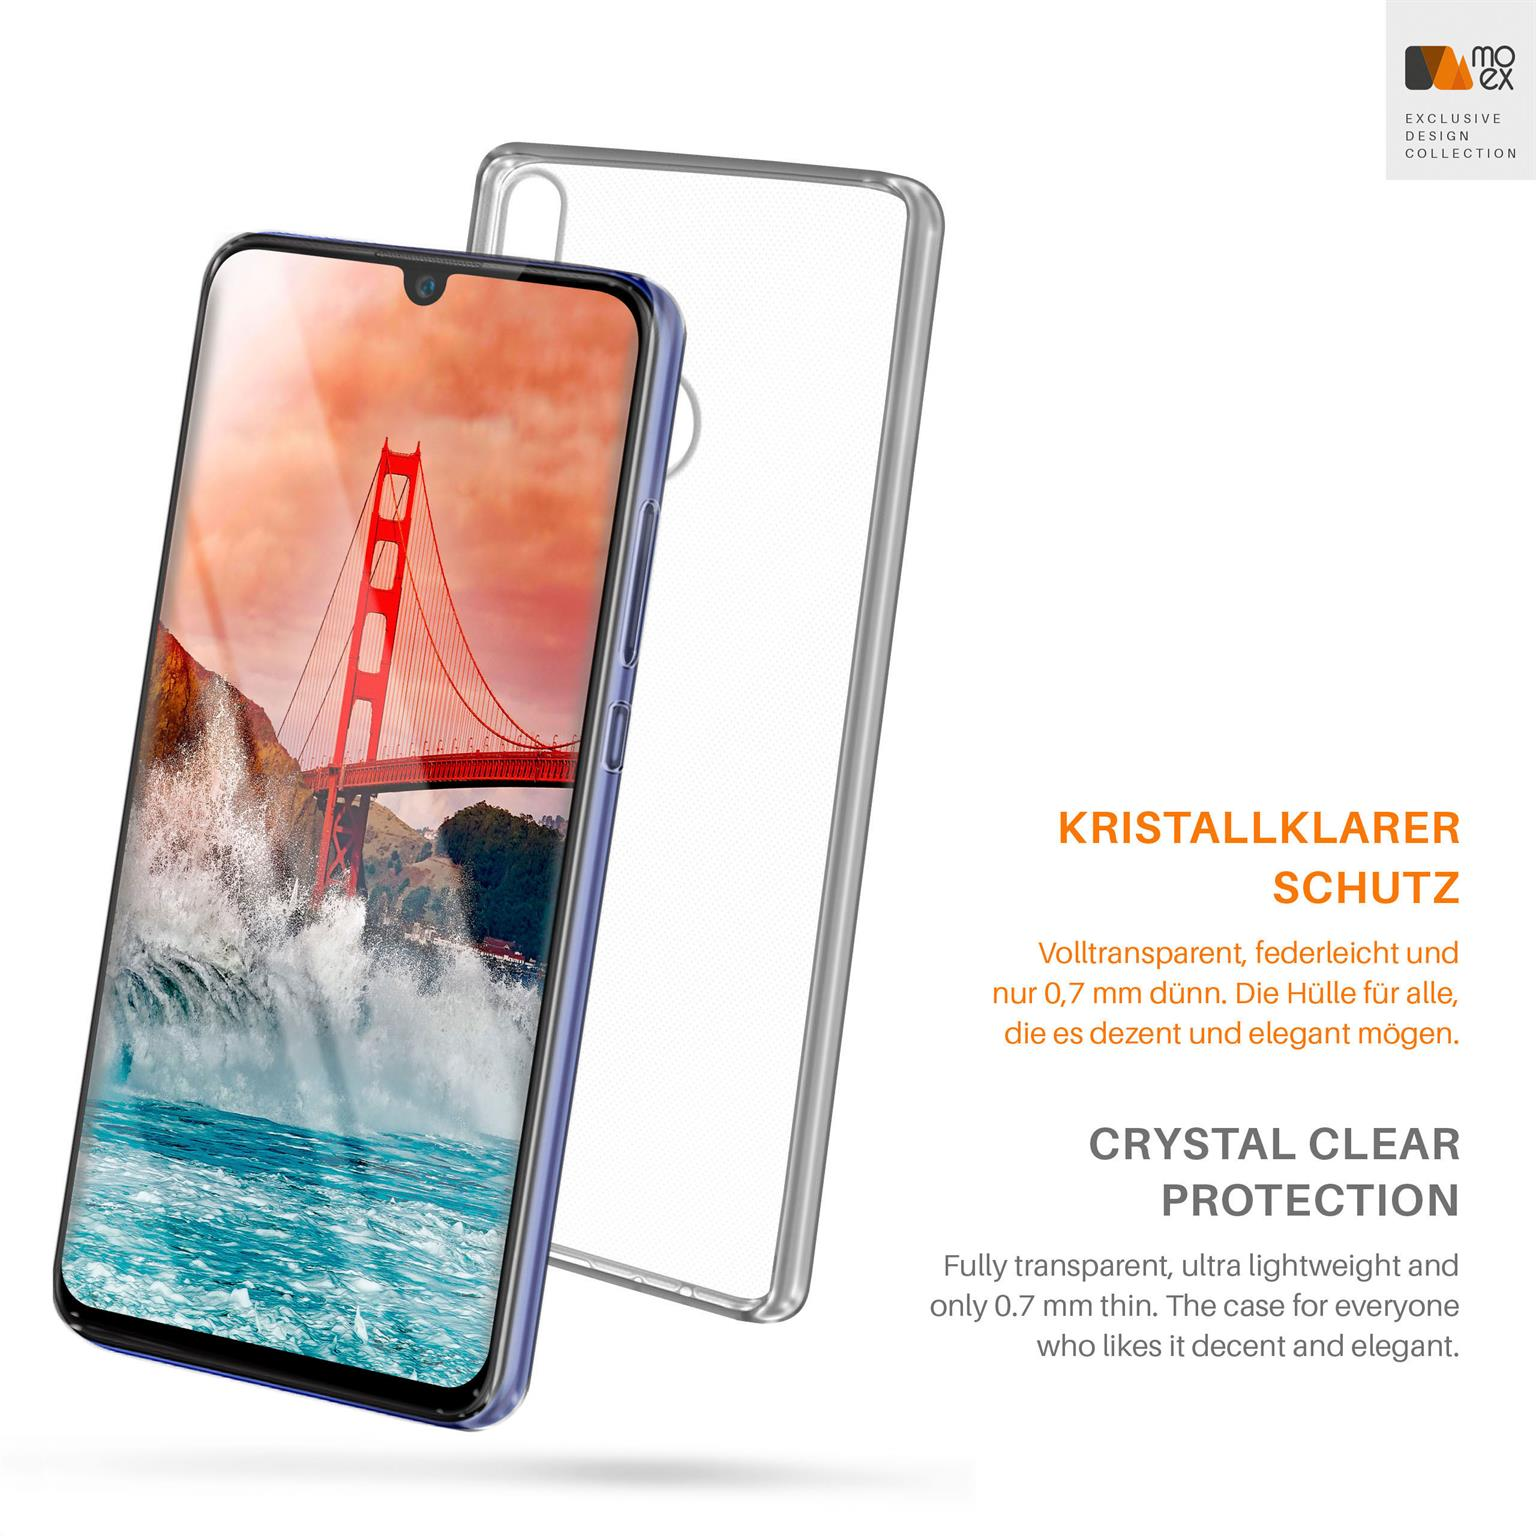 MOEX Aero Case, Backcover, Crystal-Clear Huawei, 2019, P Plus smart